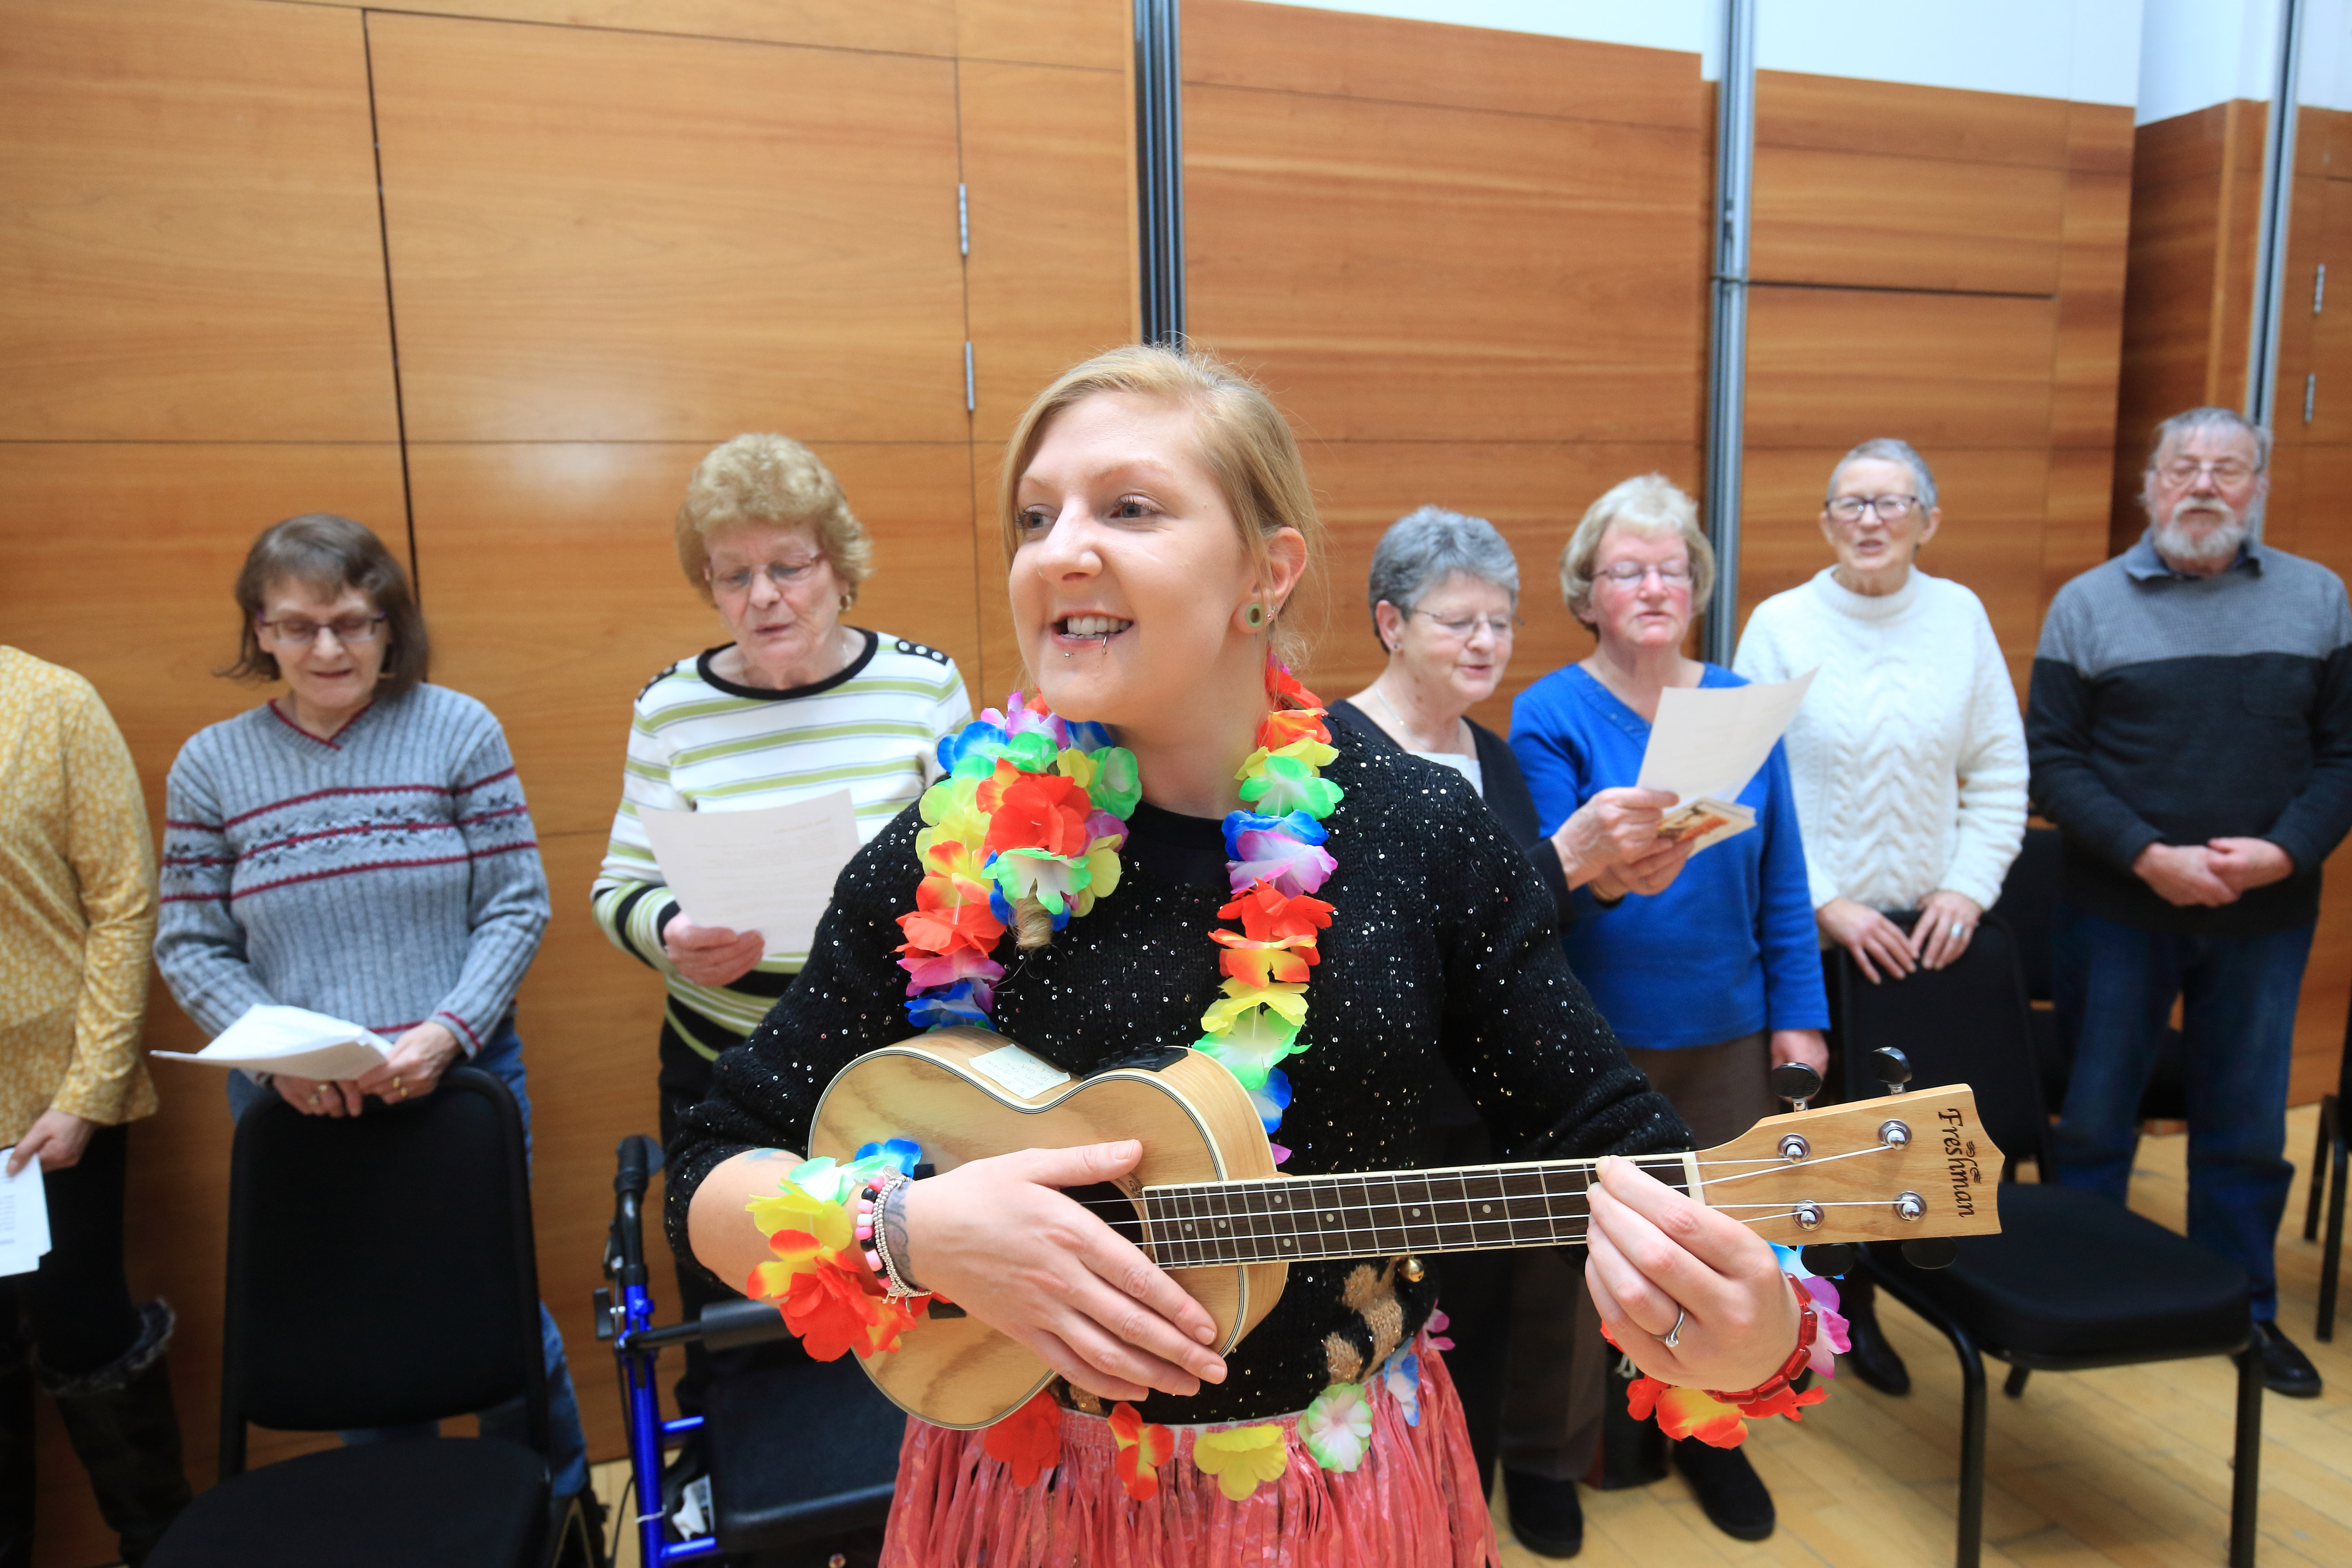 Vocal Chord Choir at Perth Concert Hall led by Emma Neck on Ukelele. Picture: Phil Hannah.